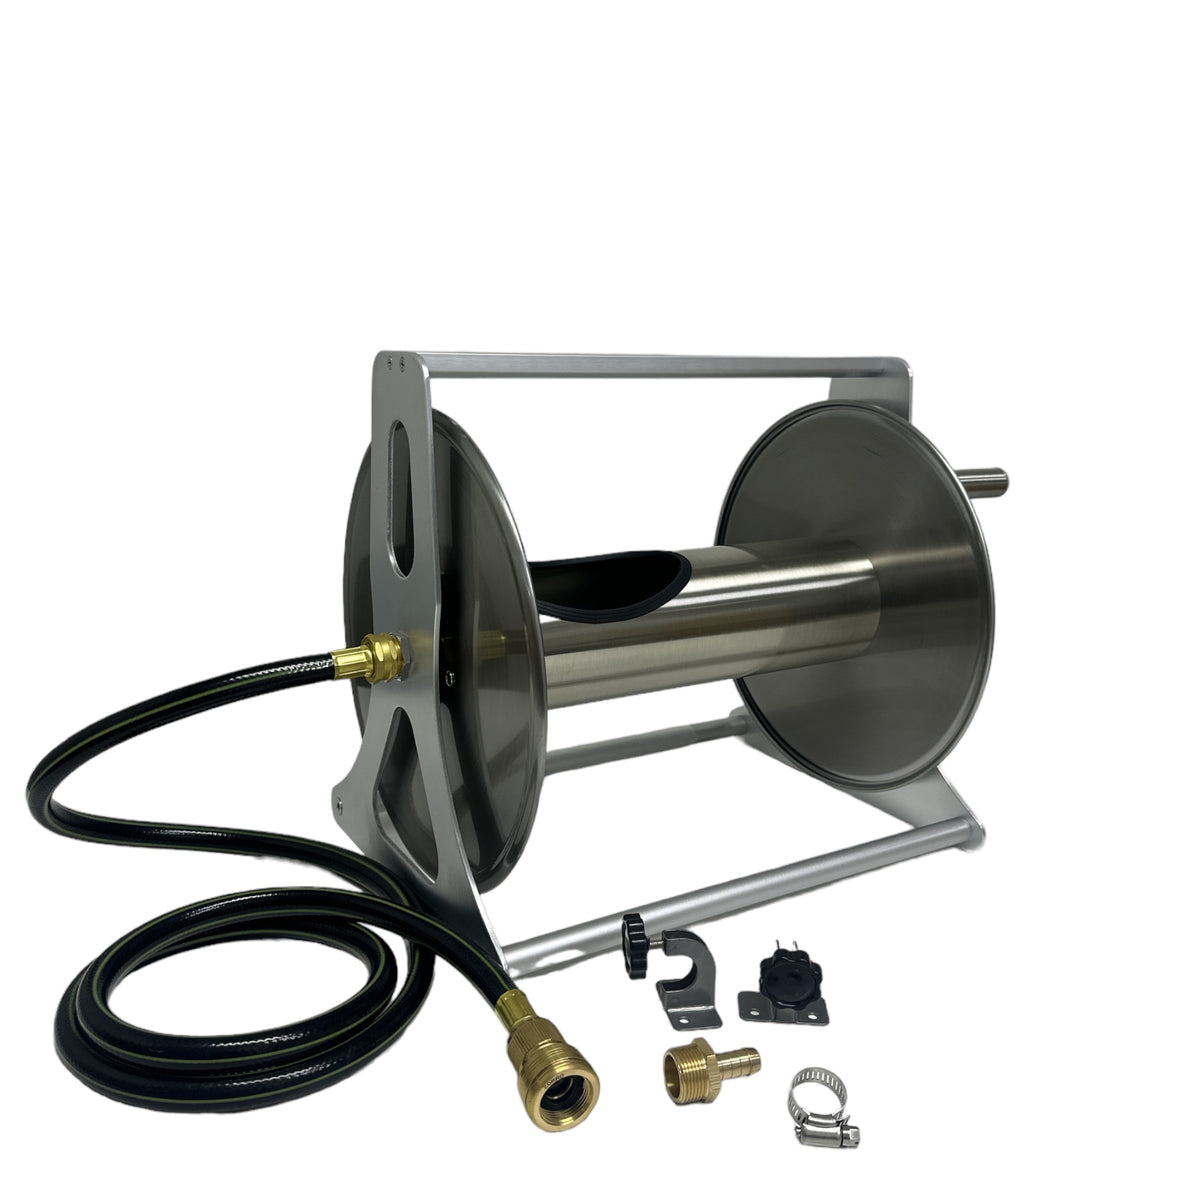 ZORRO SS Hose Reel &amp; Aquamate Hose with Brass Fittings